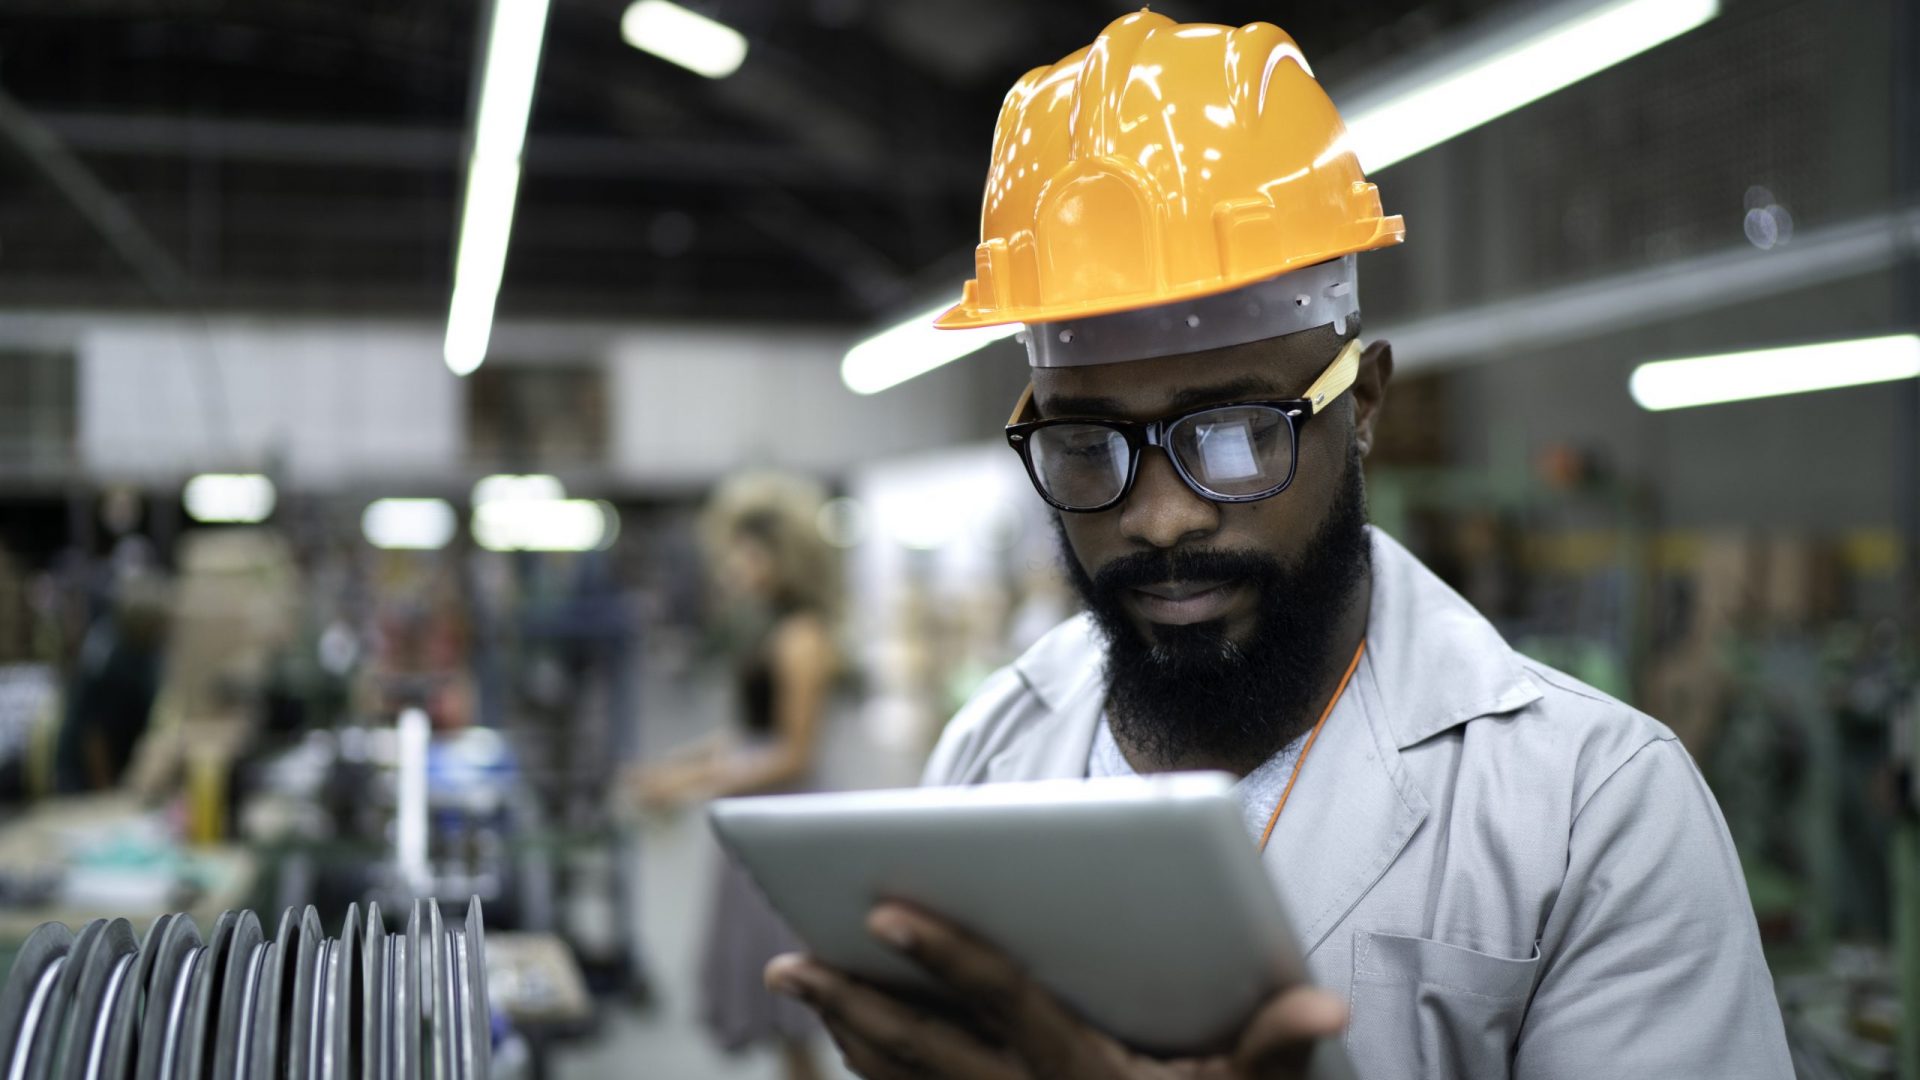 Engineer using tablet and working in factory